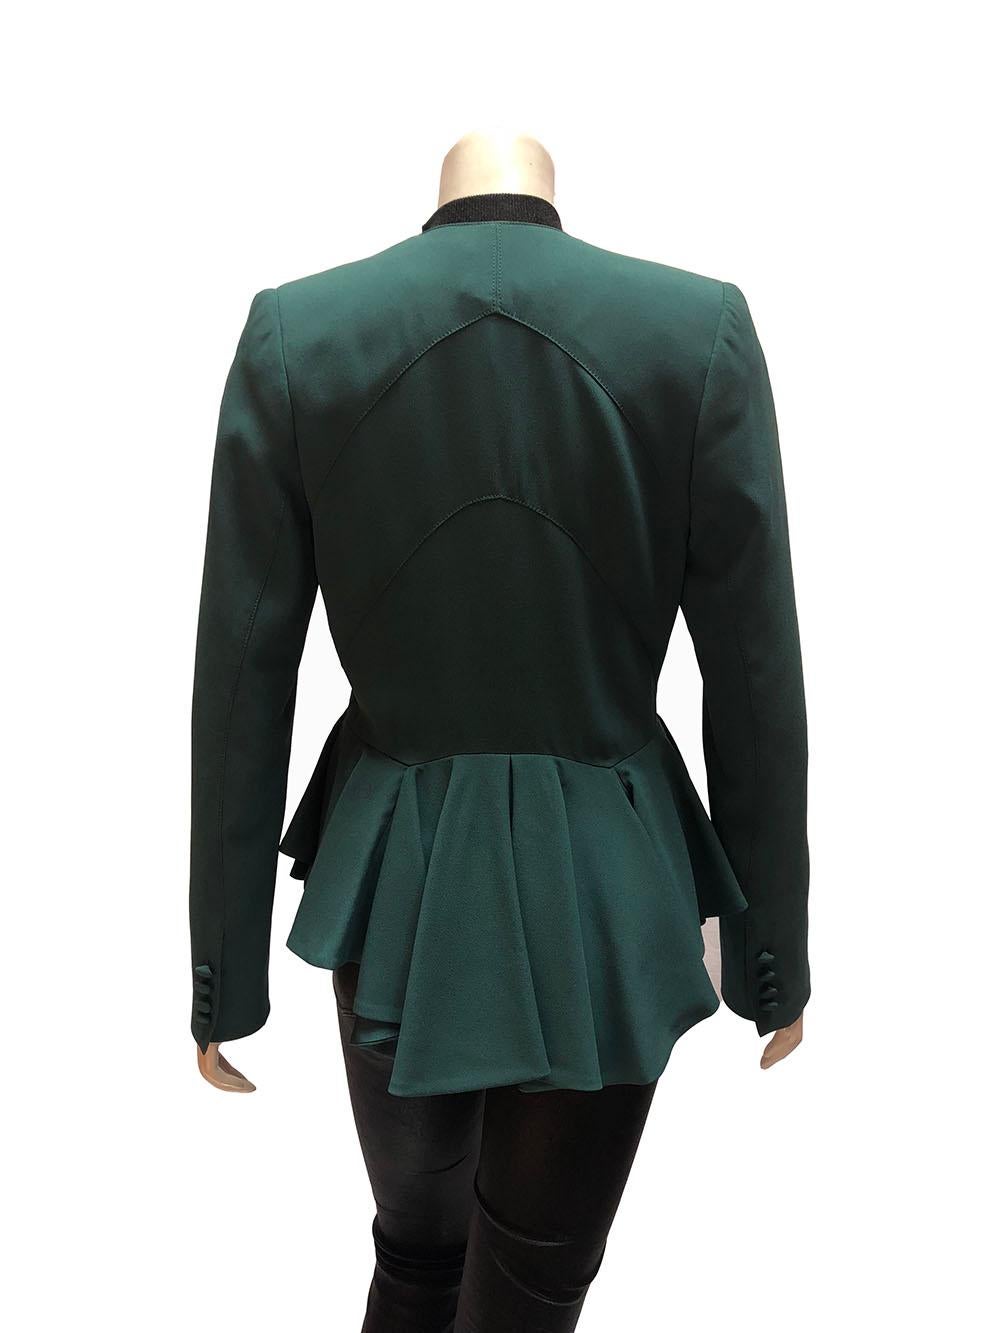 Zac Posen teal blazer with cinched waist and narrow lapels. Structured ruffle construction along the bottom below the waist, three button closure, and shoulder pads. New with tags attached. Size 40. 